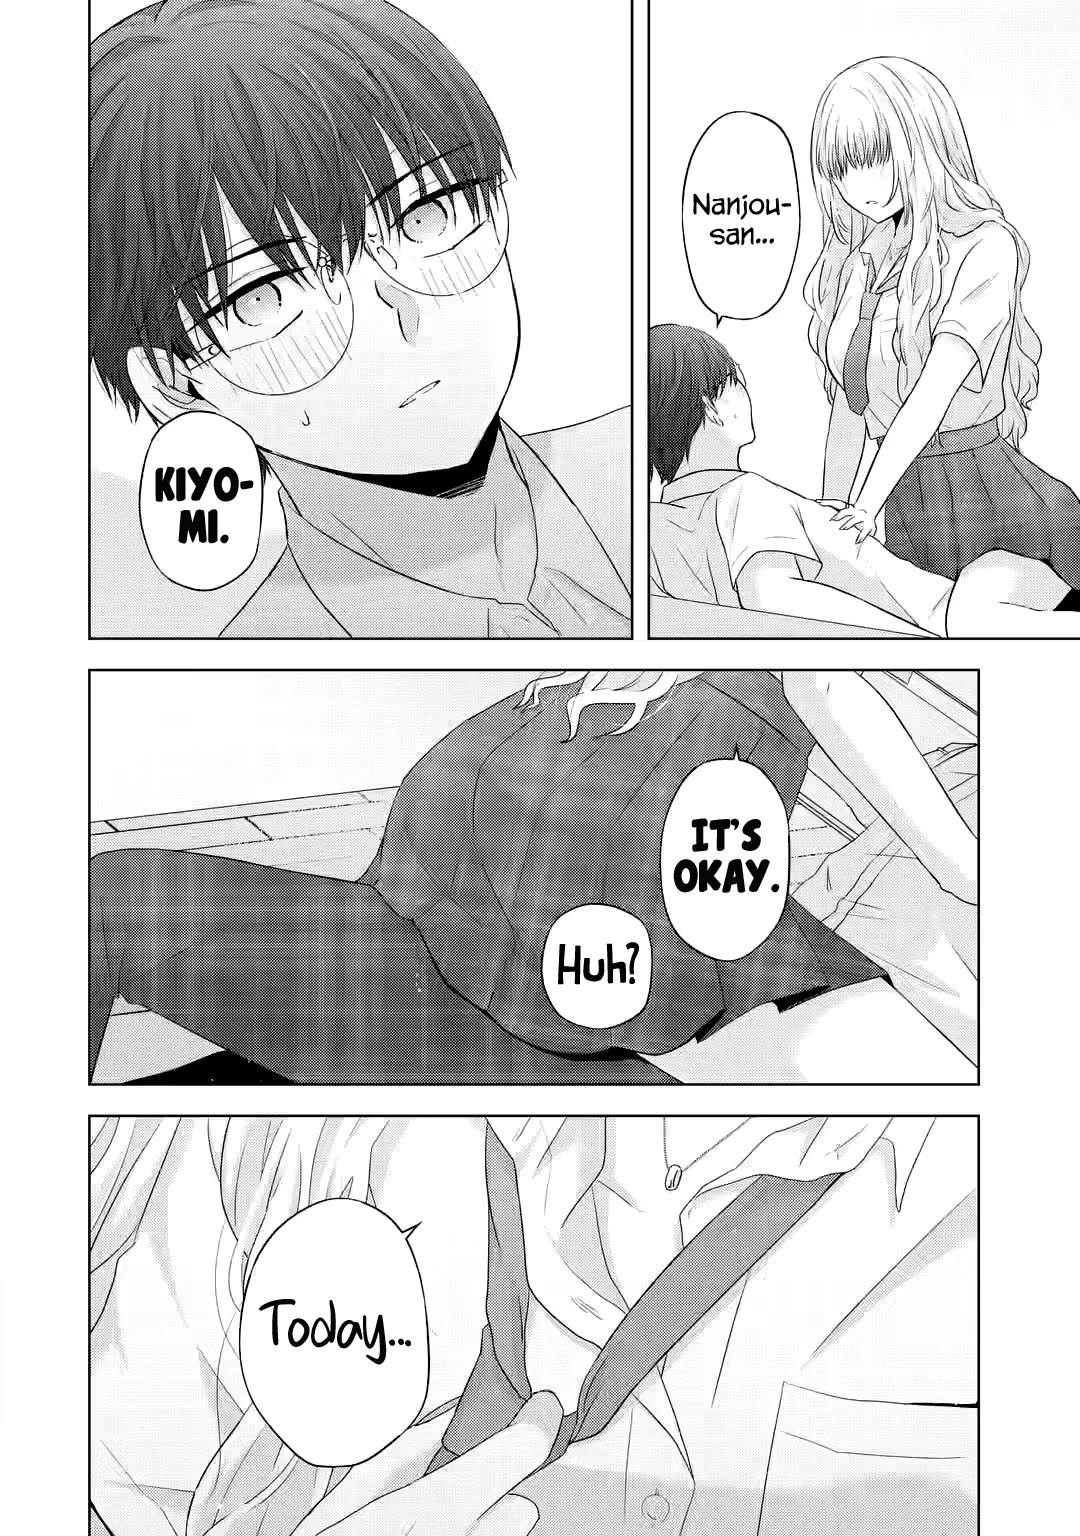 Nanjou-san Wants to Be Held by Me - chapter 9 - #3